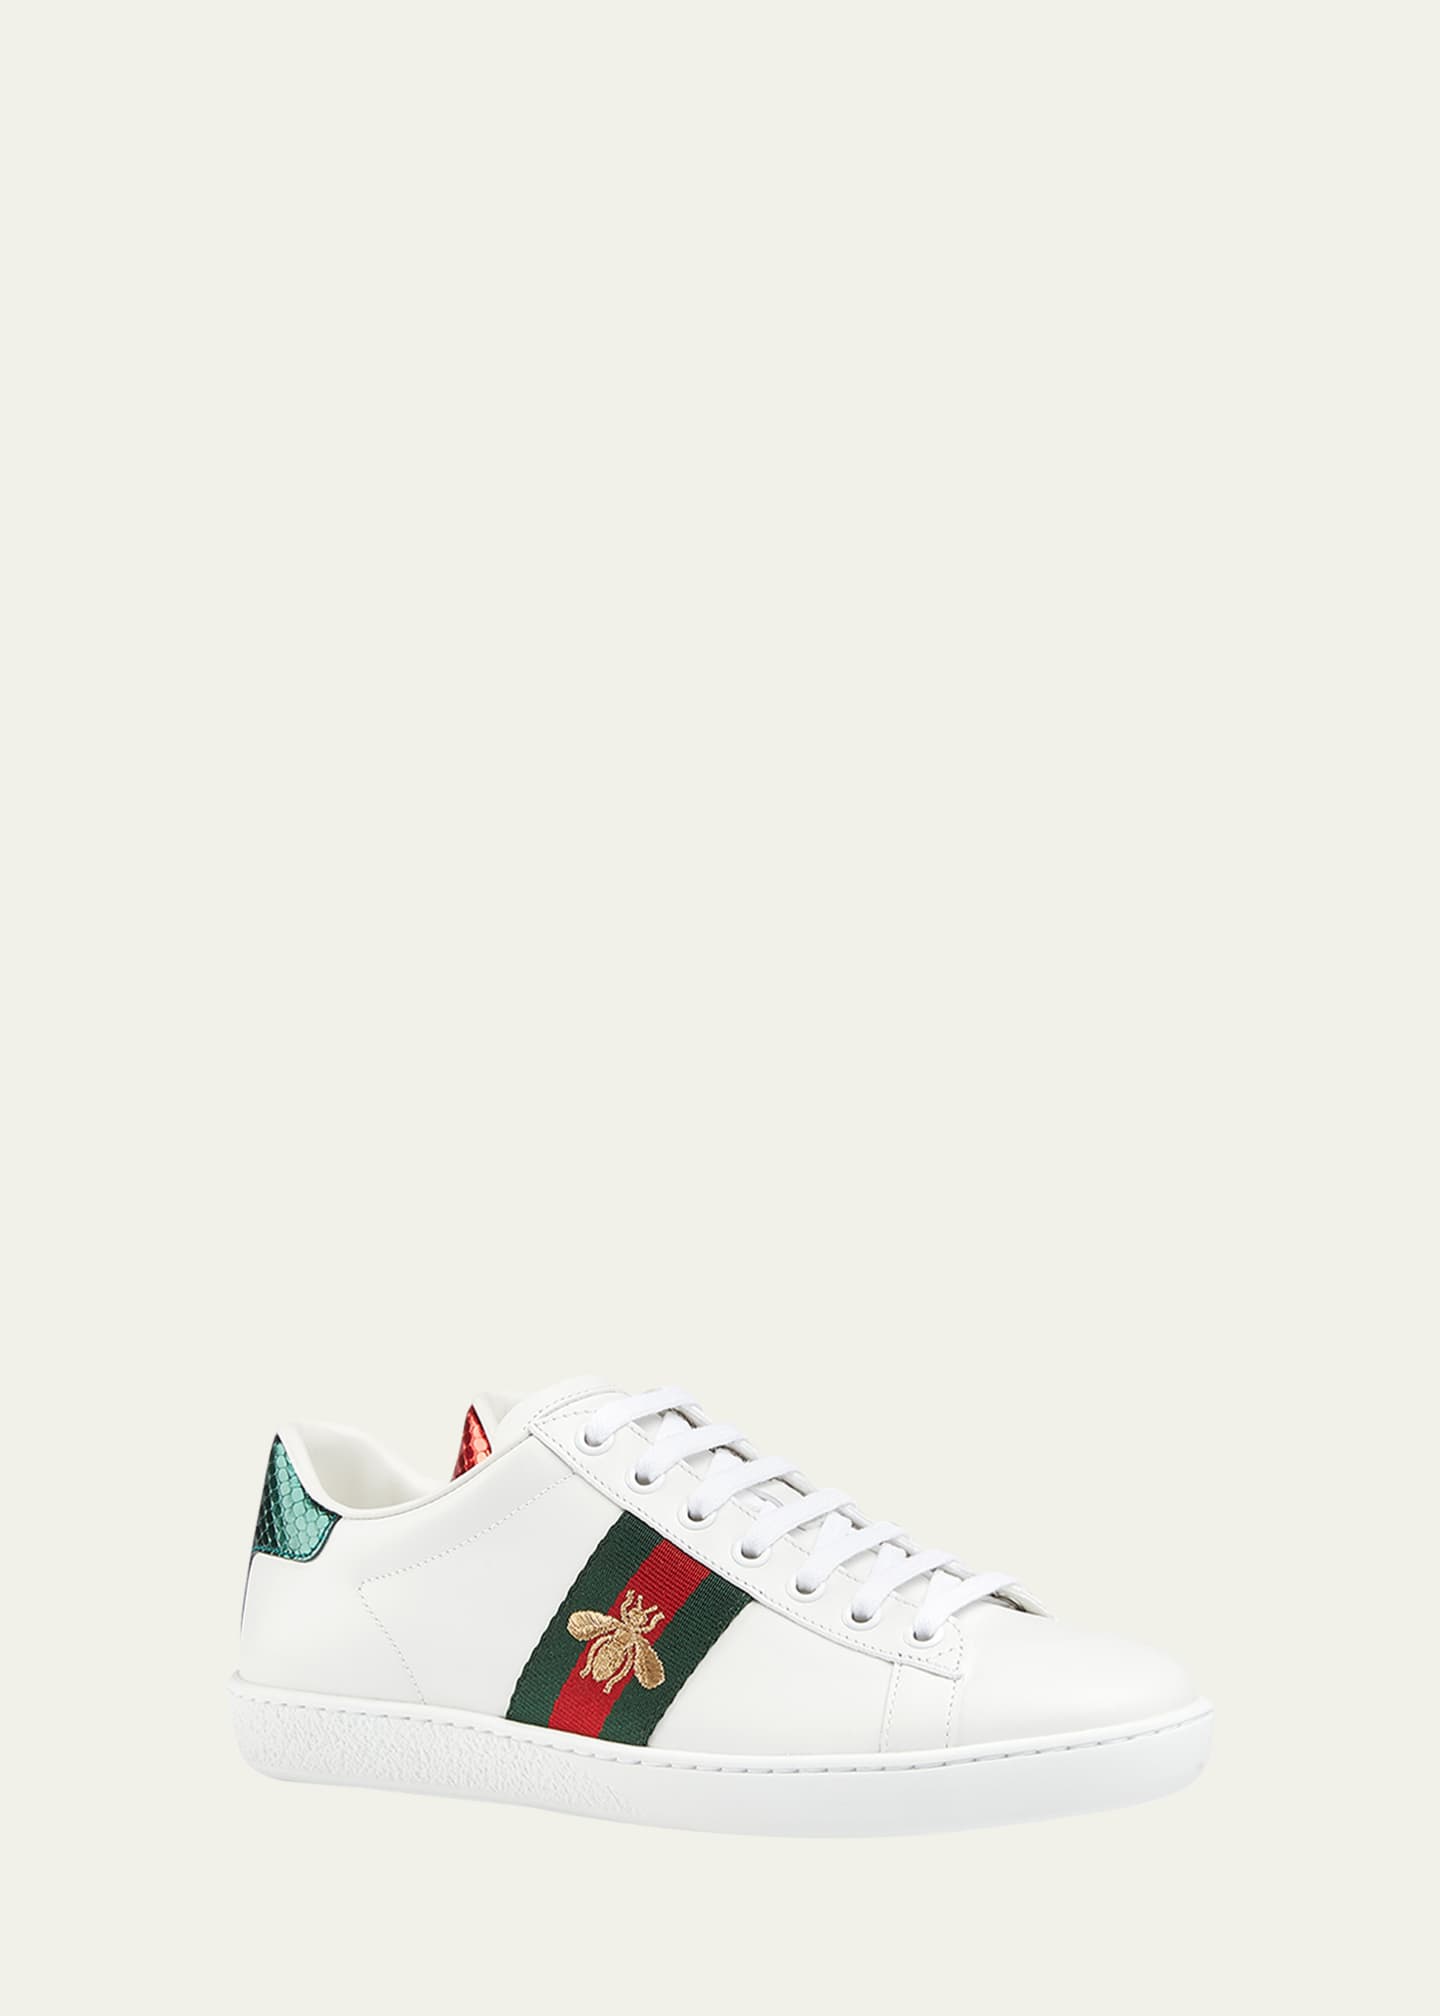 Gucci New Ace Bee Sneakers Image 2 of 3